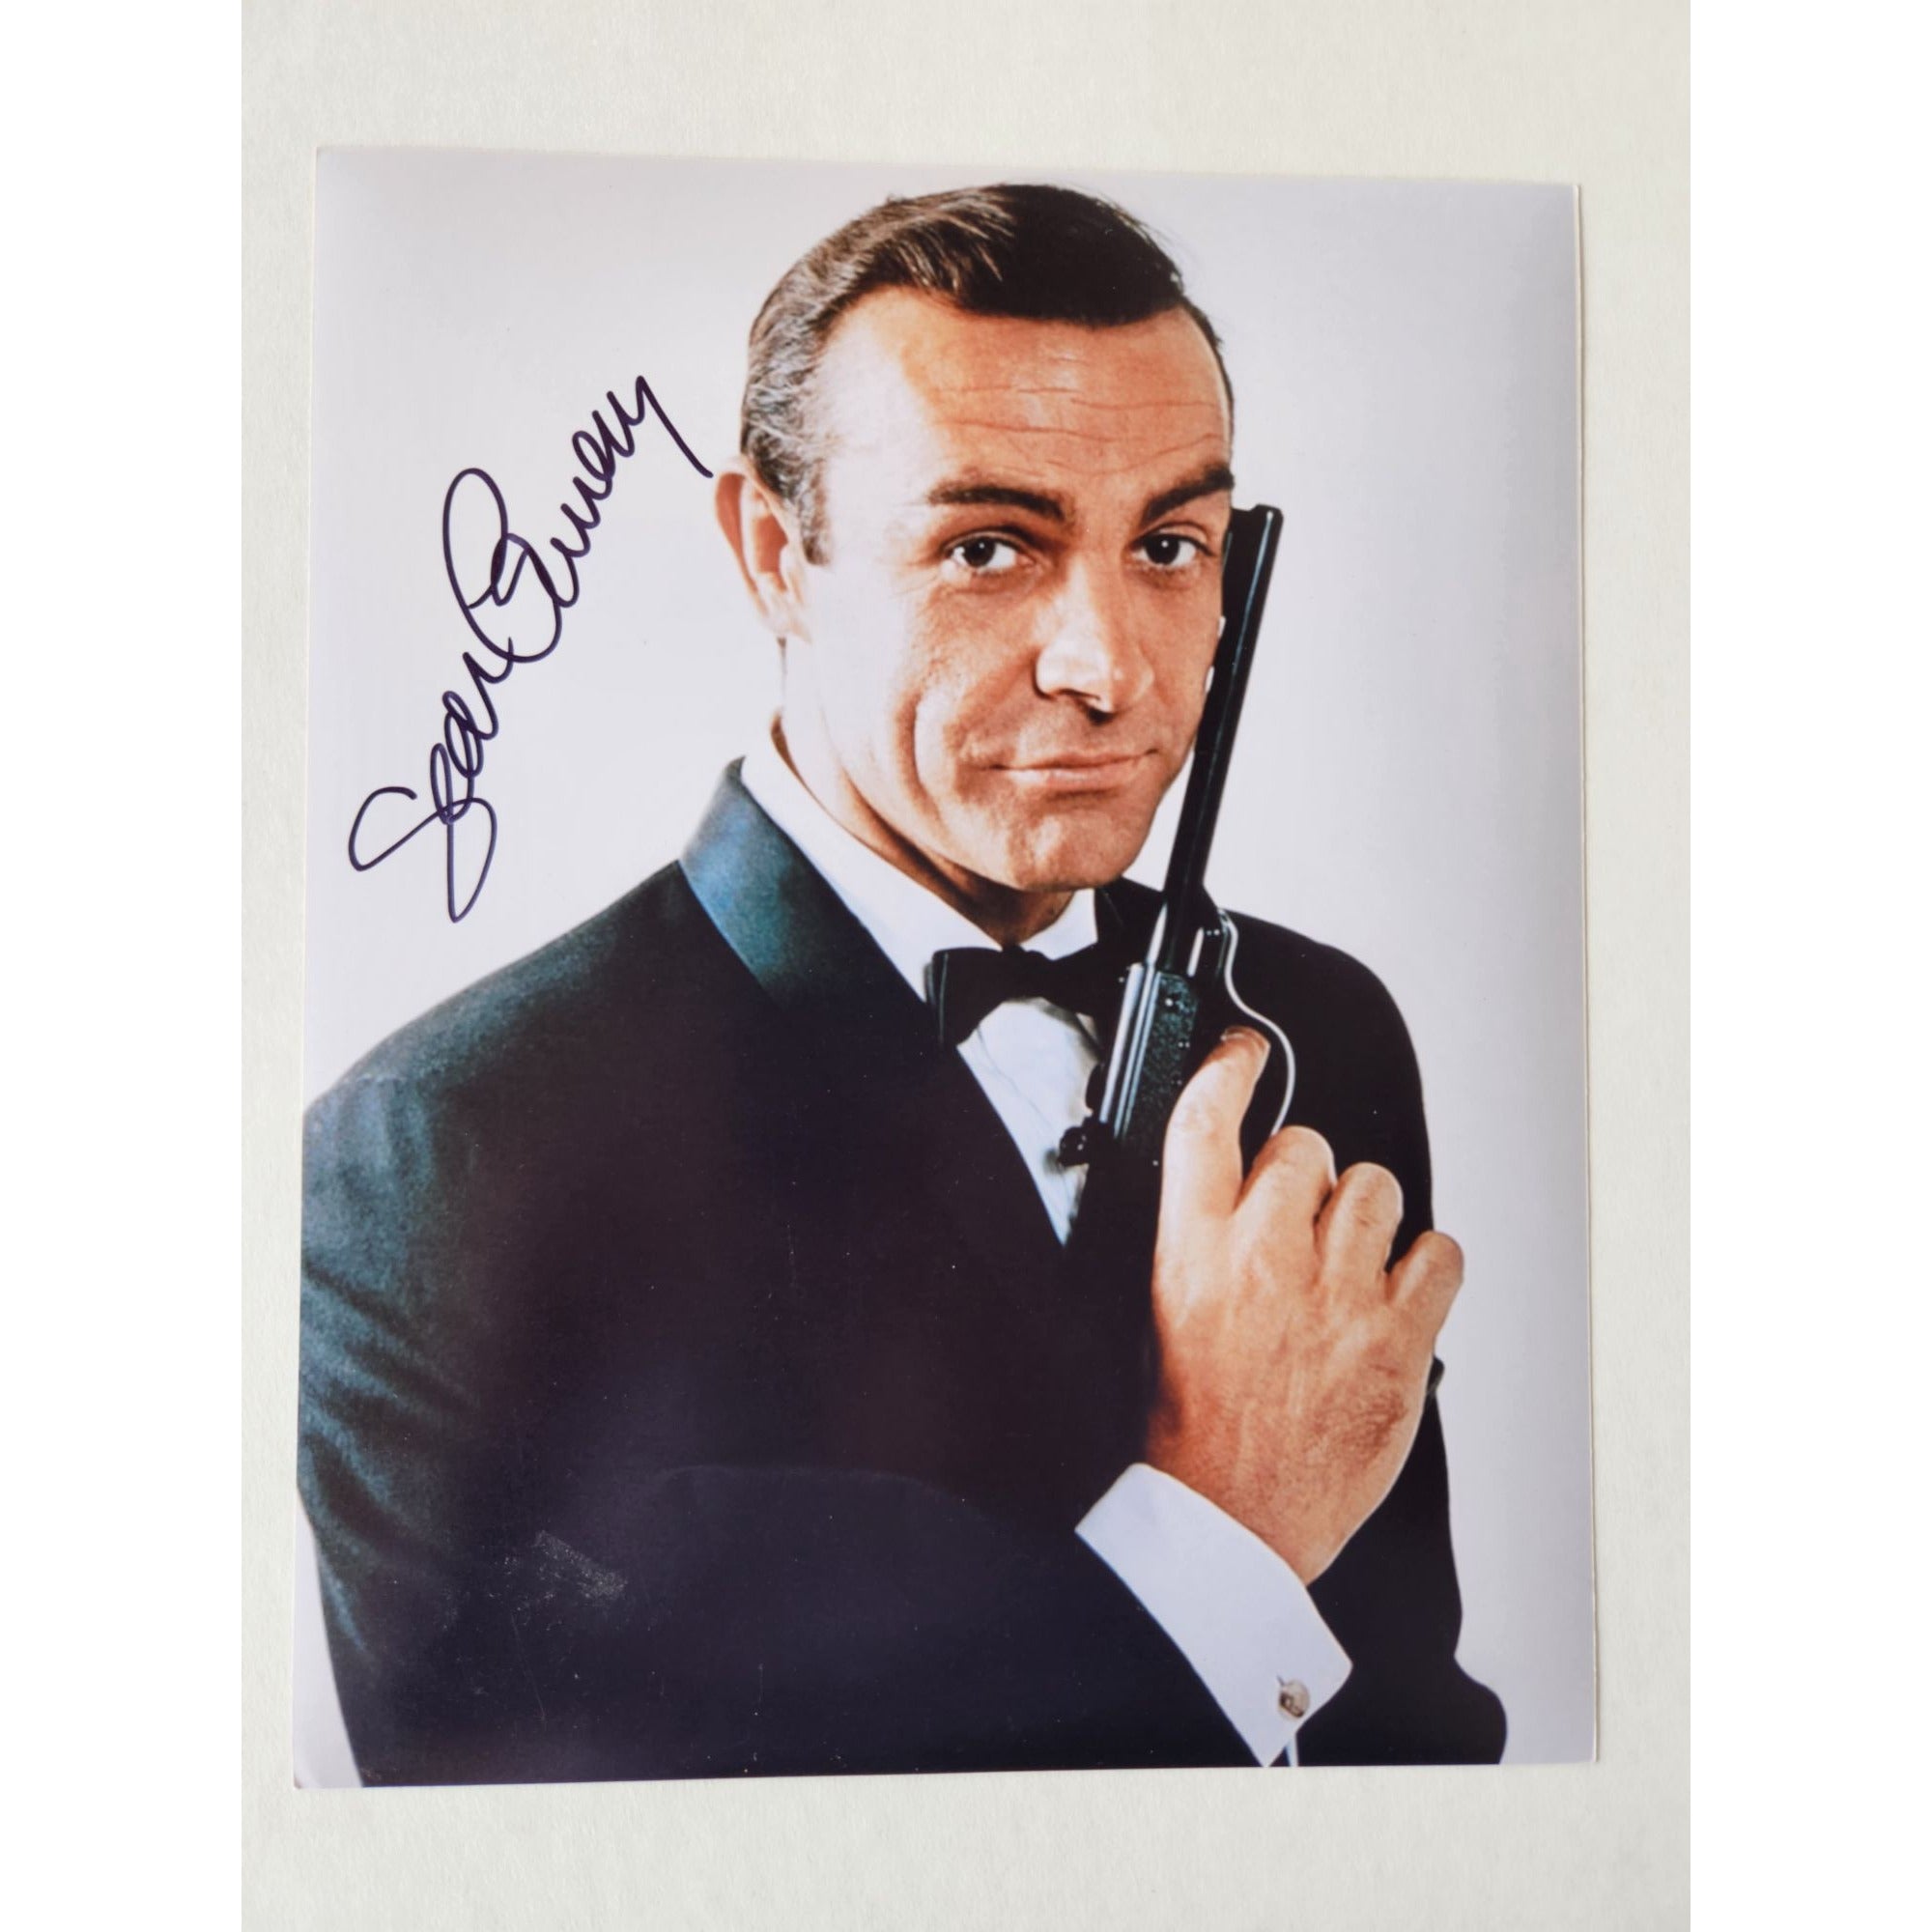 Sean Connery James Bond 007 8x10 photo signed with proof